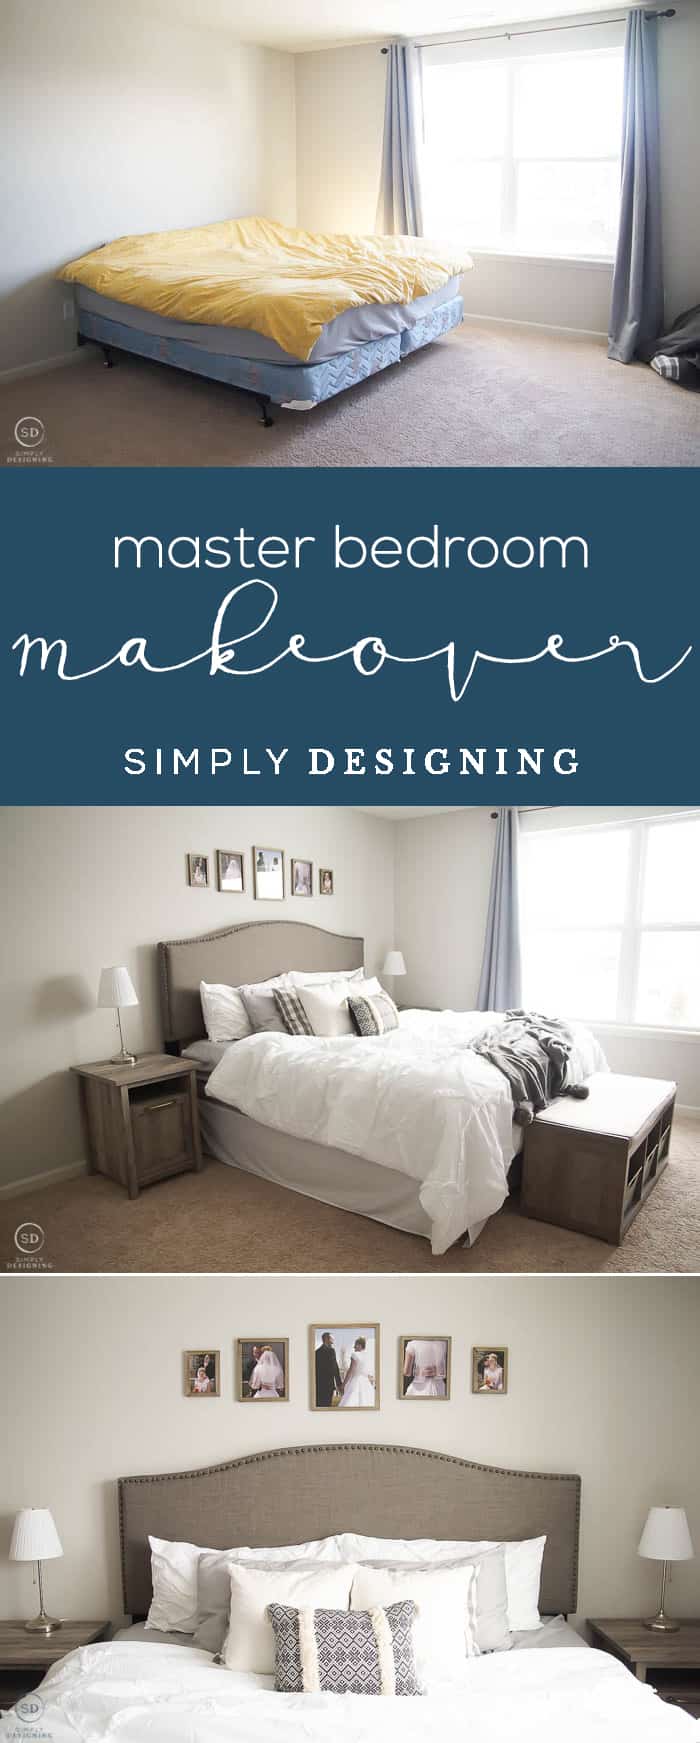 Incredible Master Bedroom Makeover - Before and After